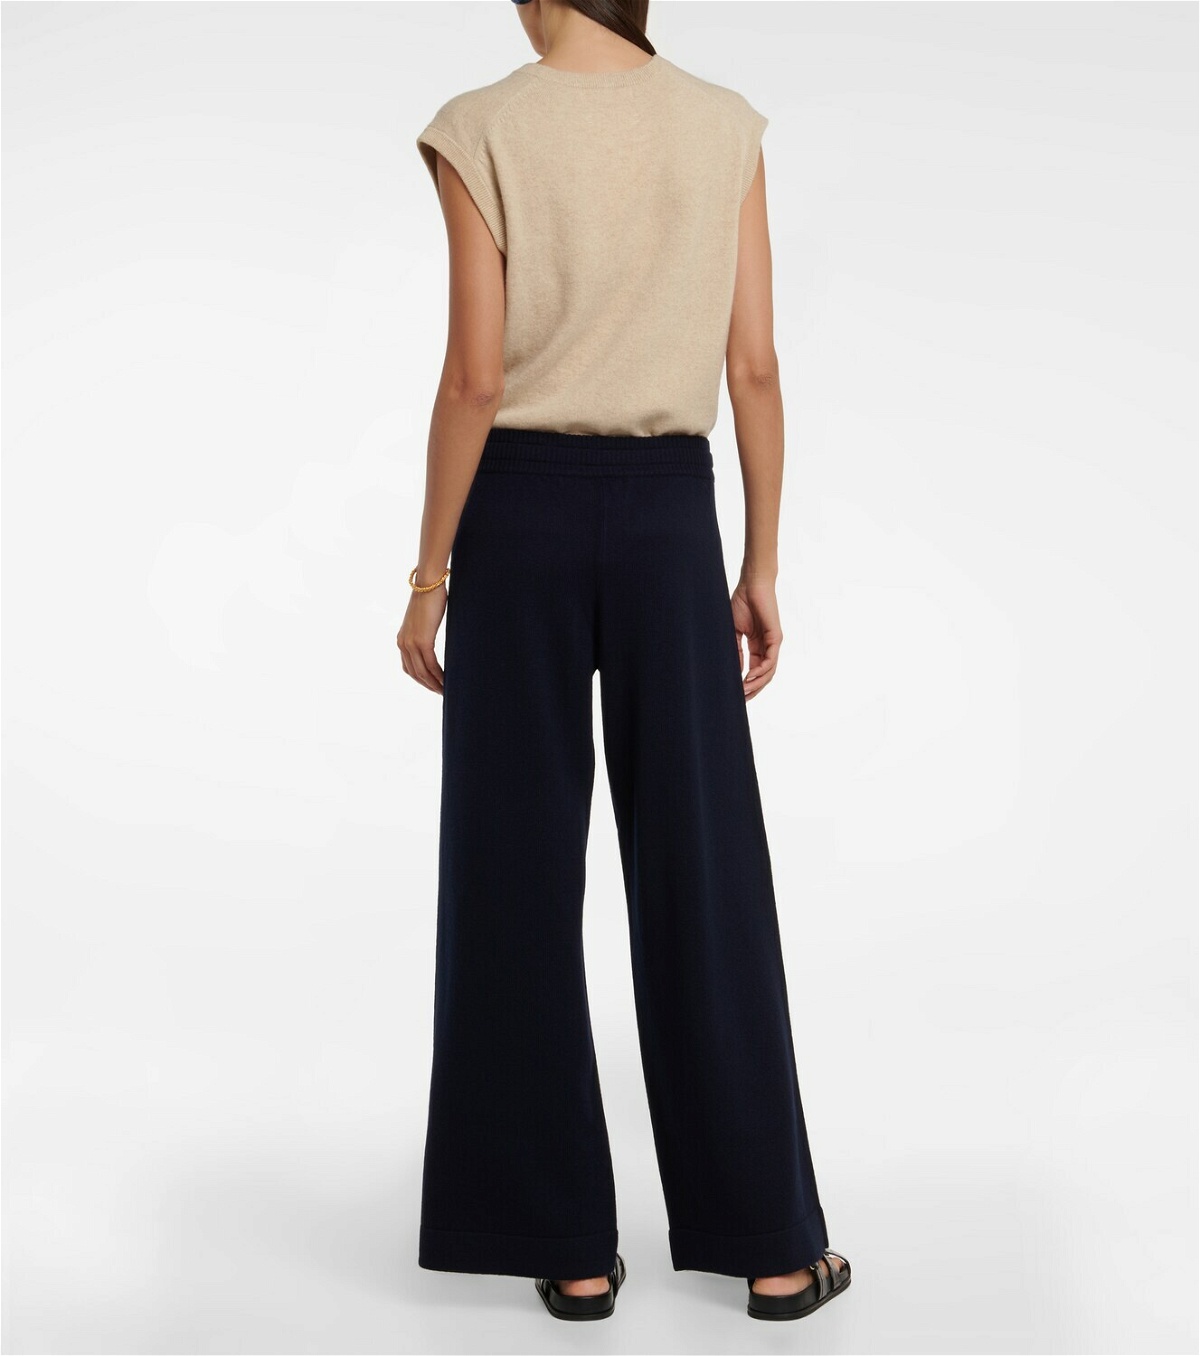 Eres - Frederique wool and cashmere pants ERES